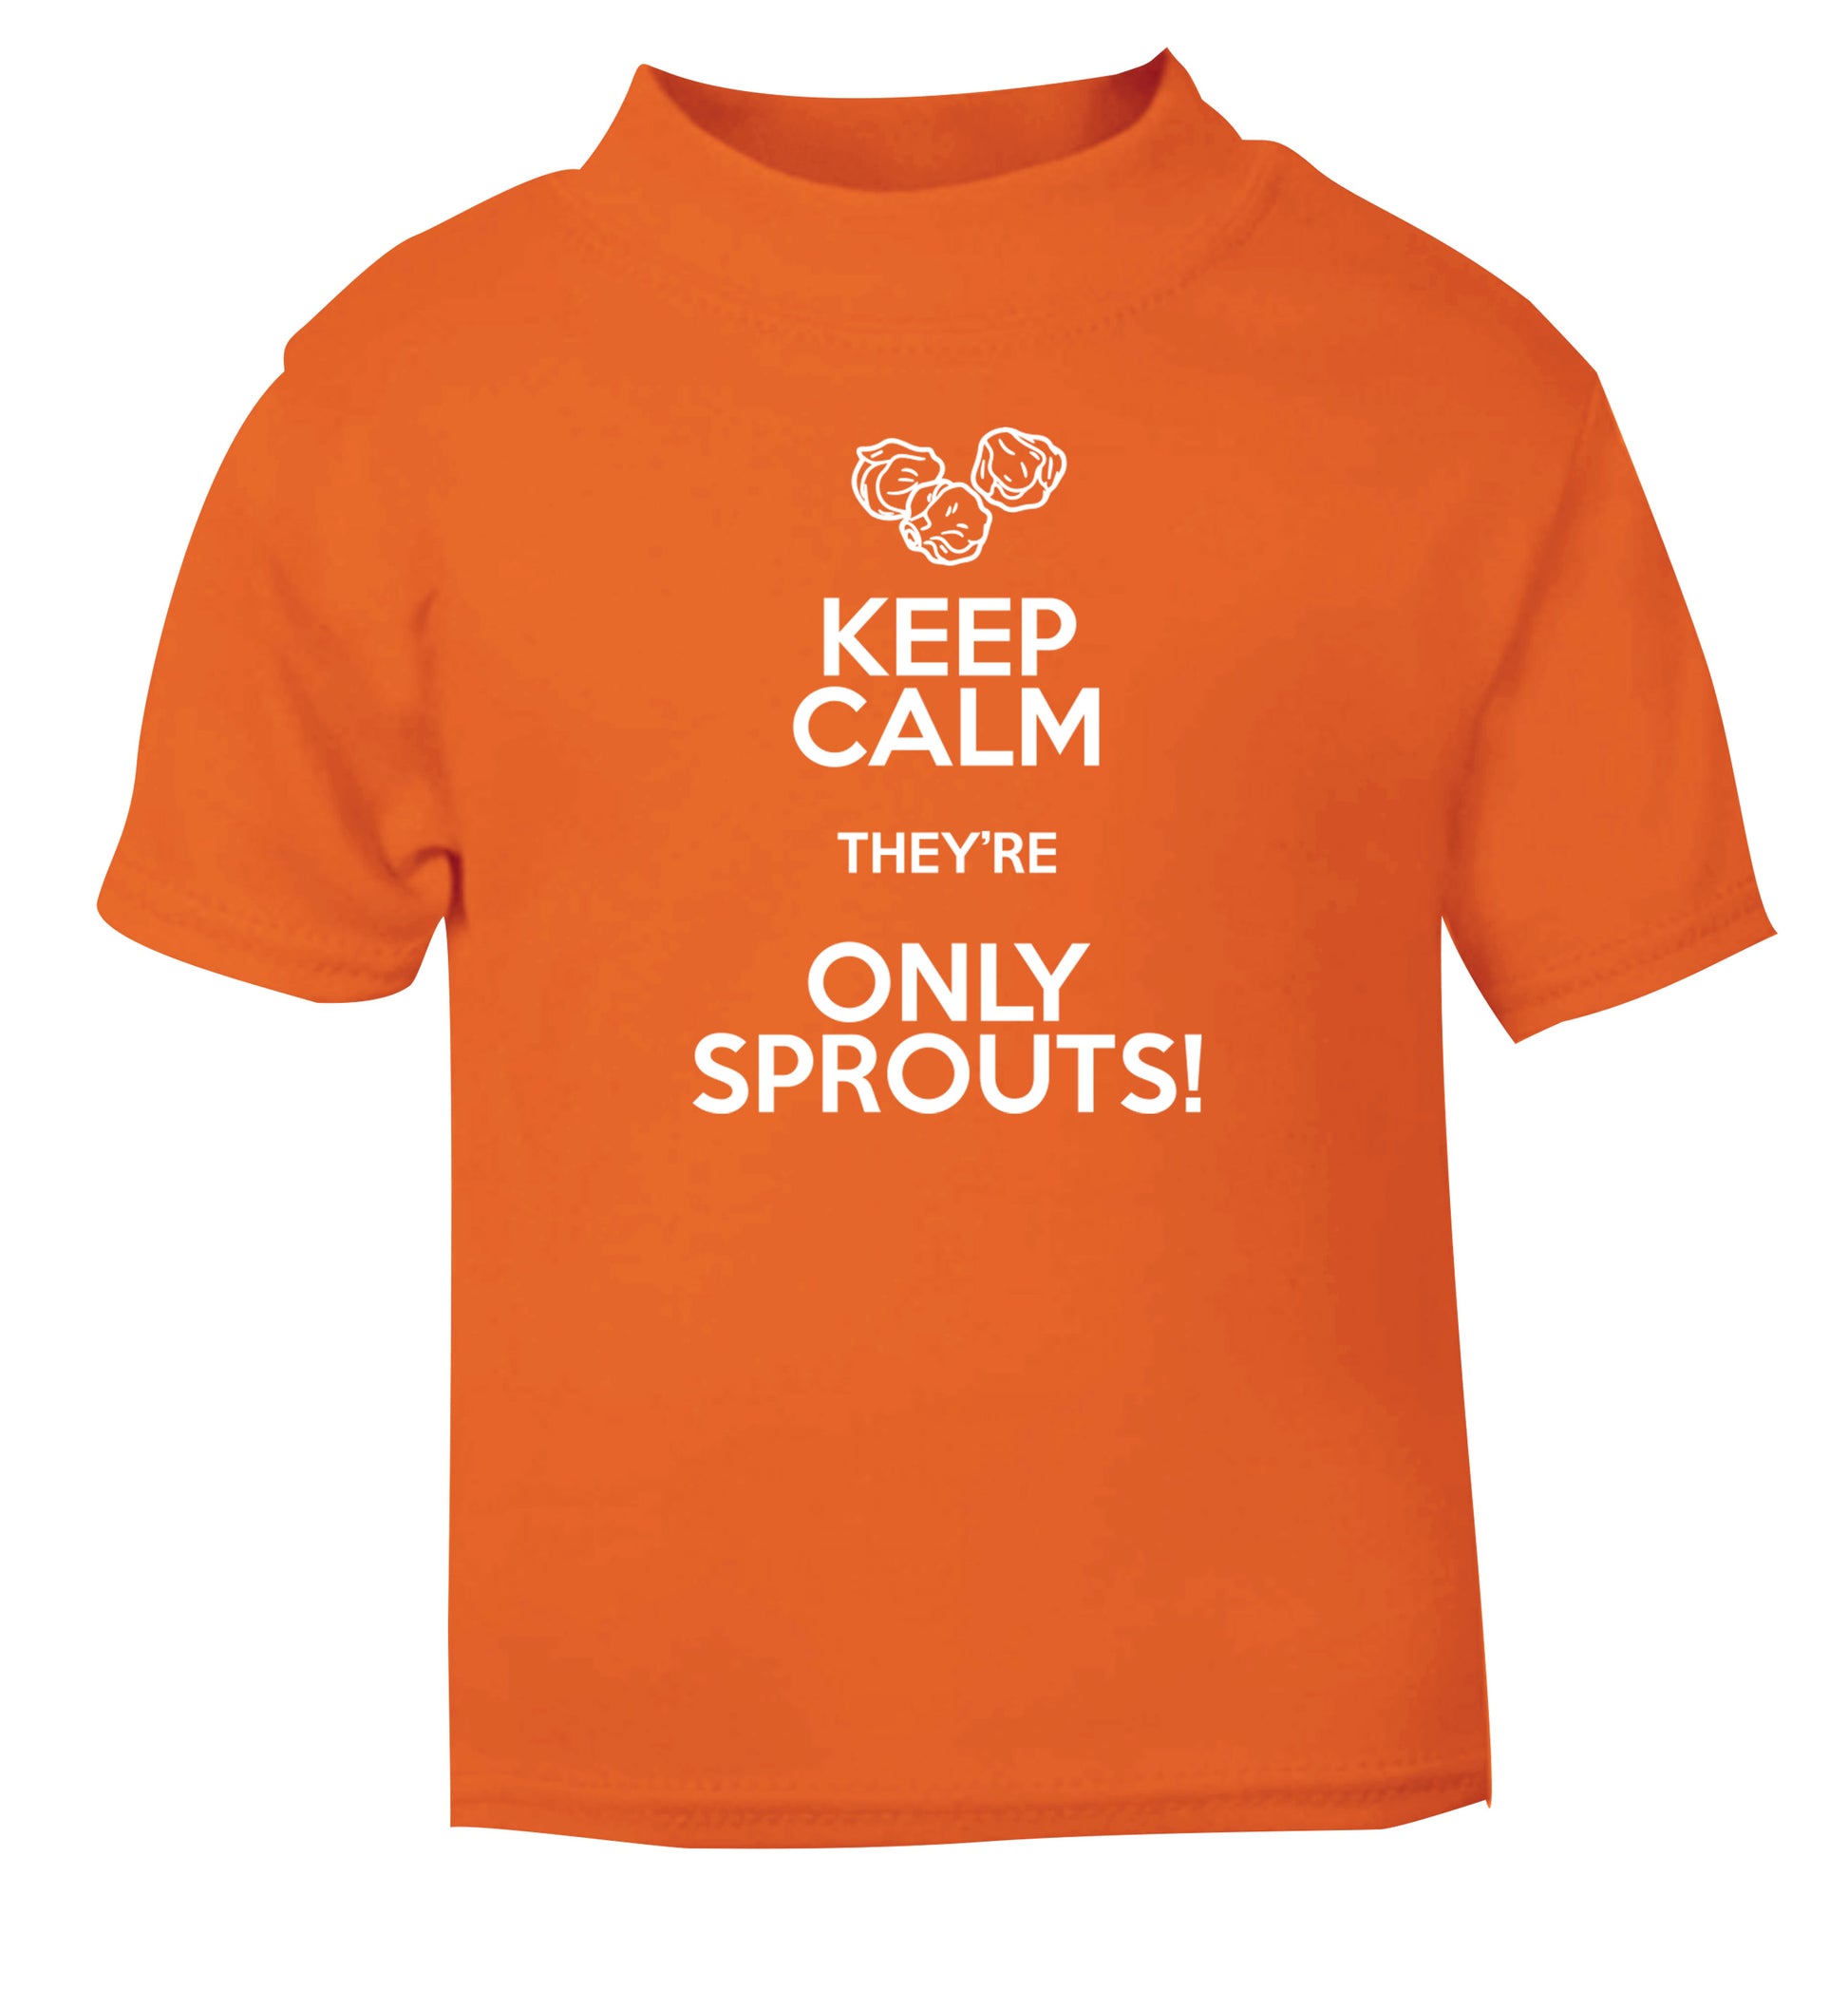 Keep calm they're only sprouts orange Baby Toddler Tshirt 2 Years